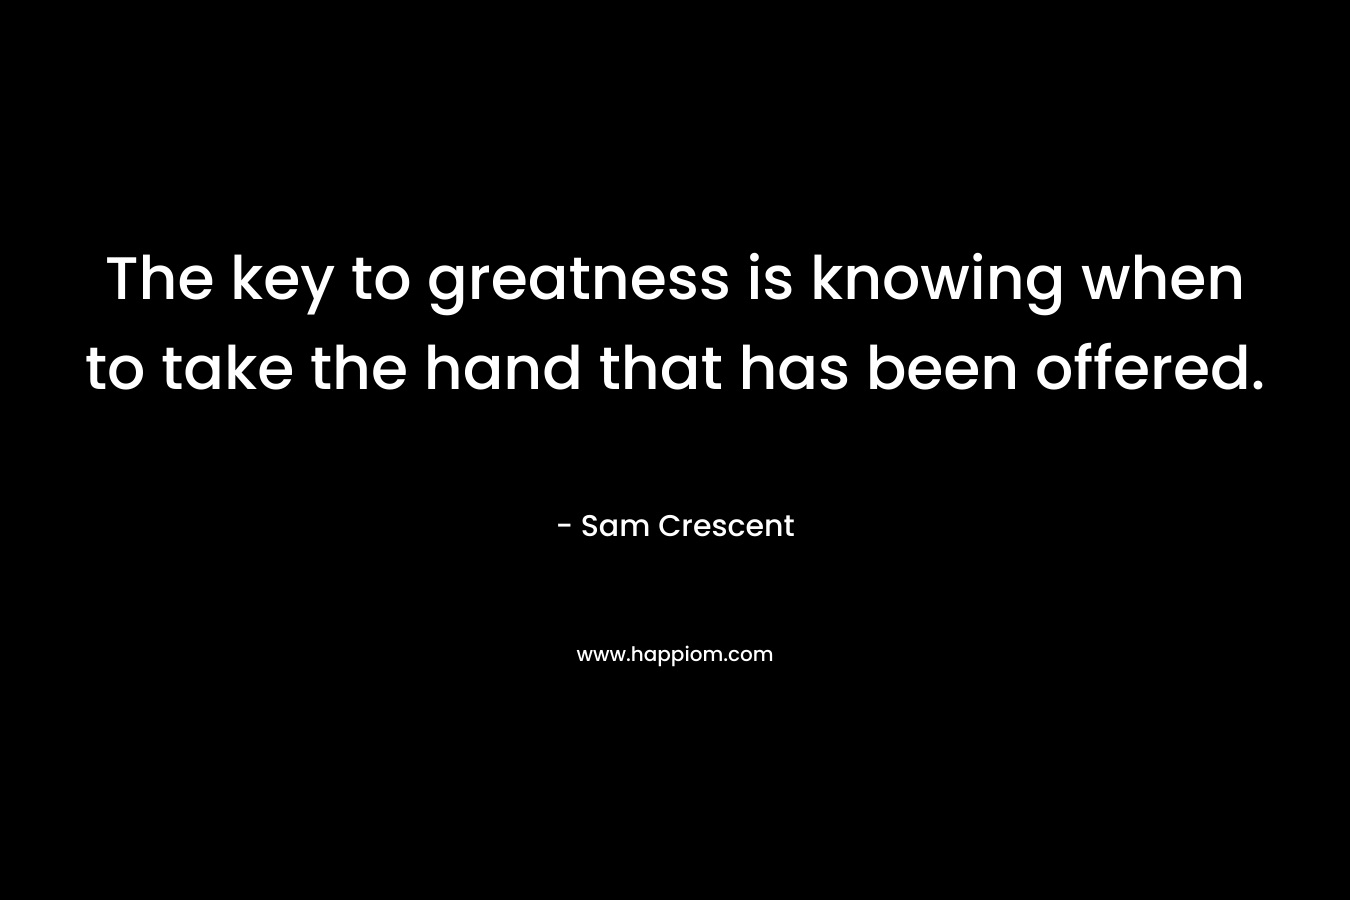 The key to greatness is knowing when to take the hand that has been offered.